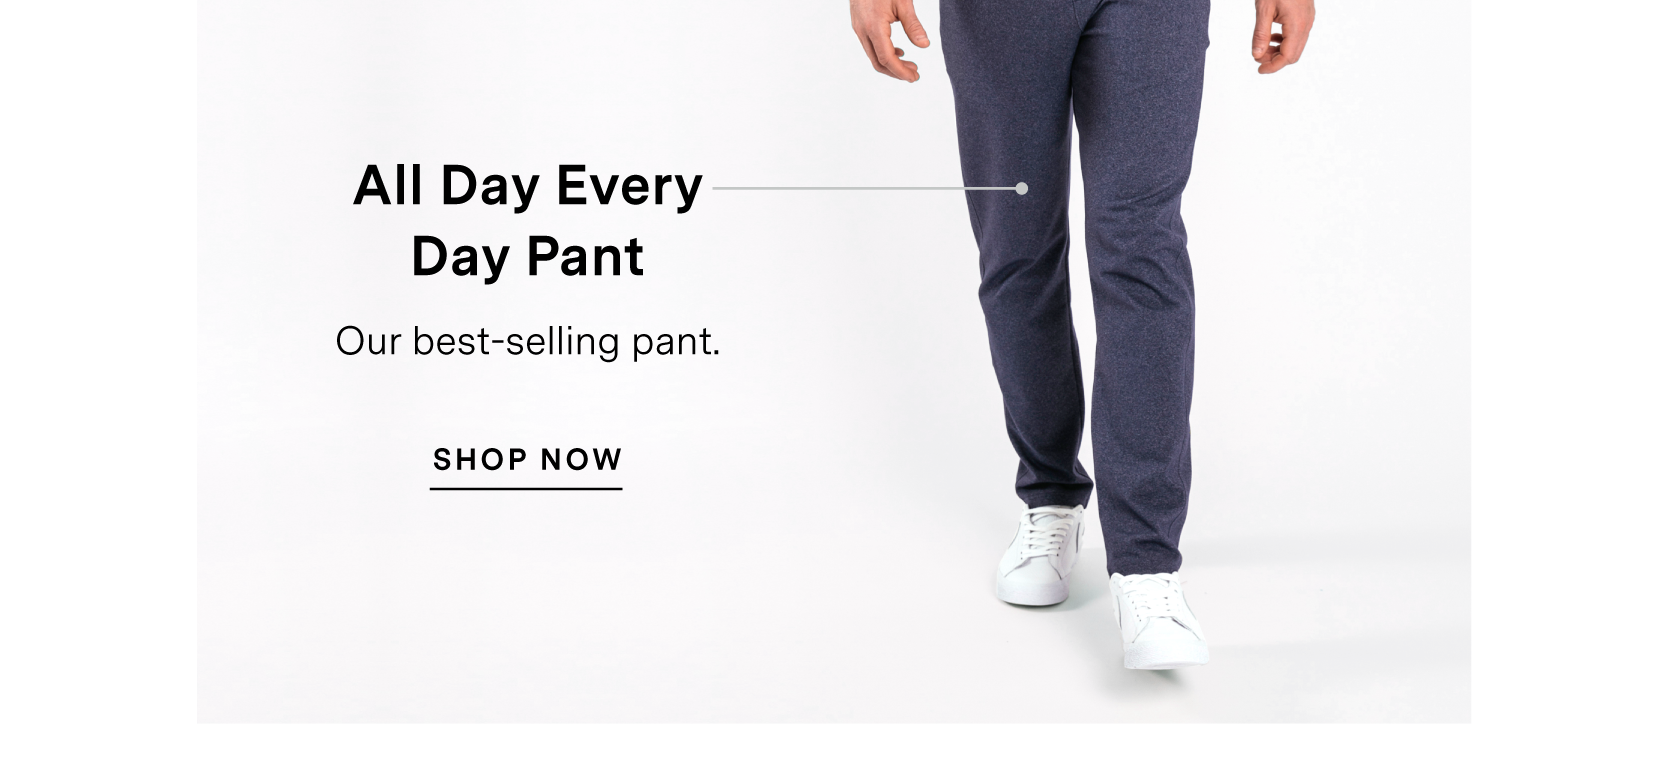 All Day Every Day Pant. SHOP NOW